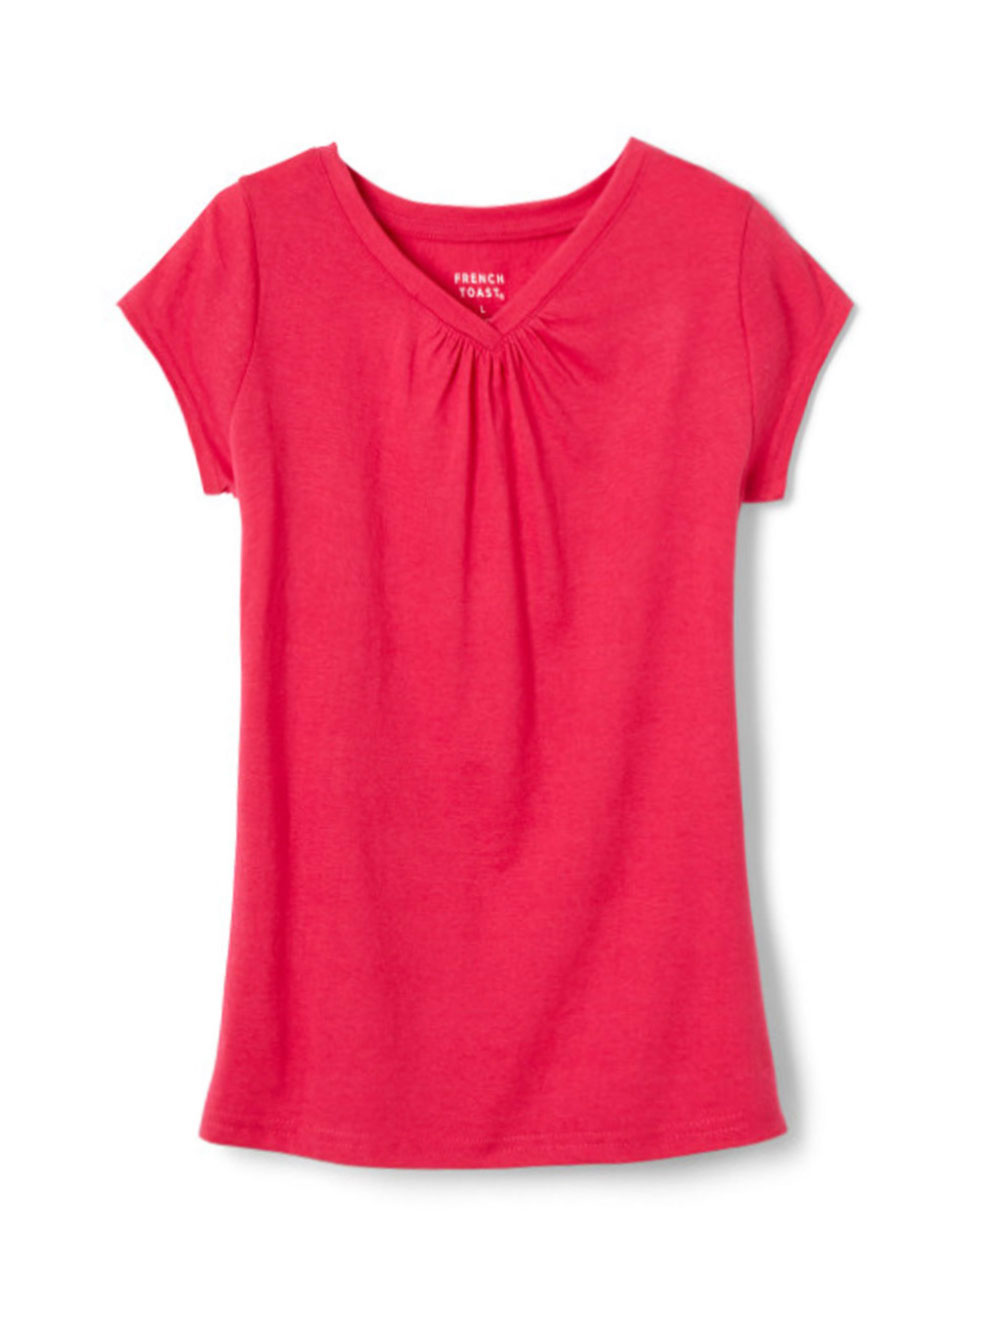 Size 7-8 T-Shirts for Girls